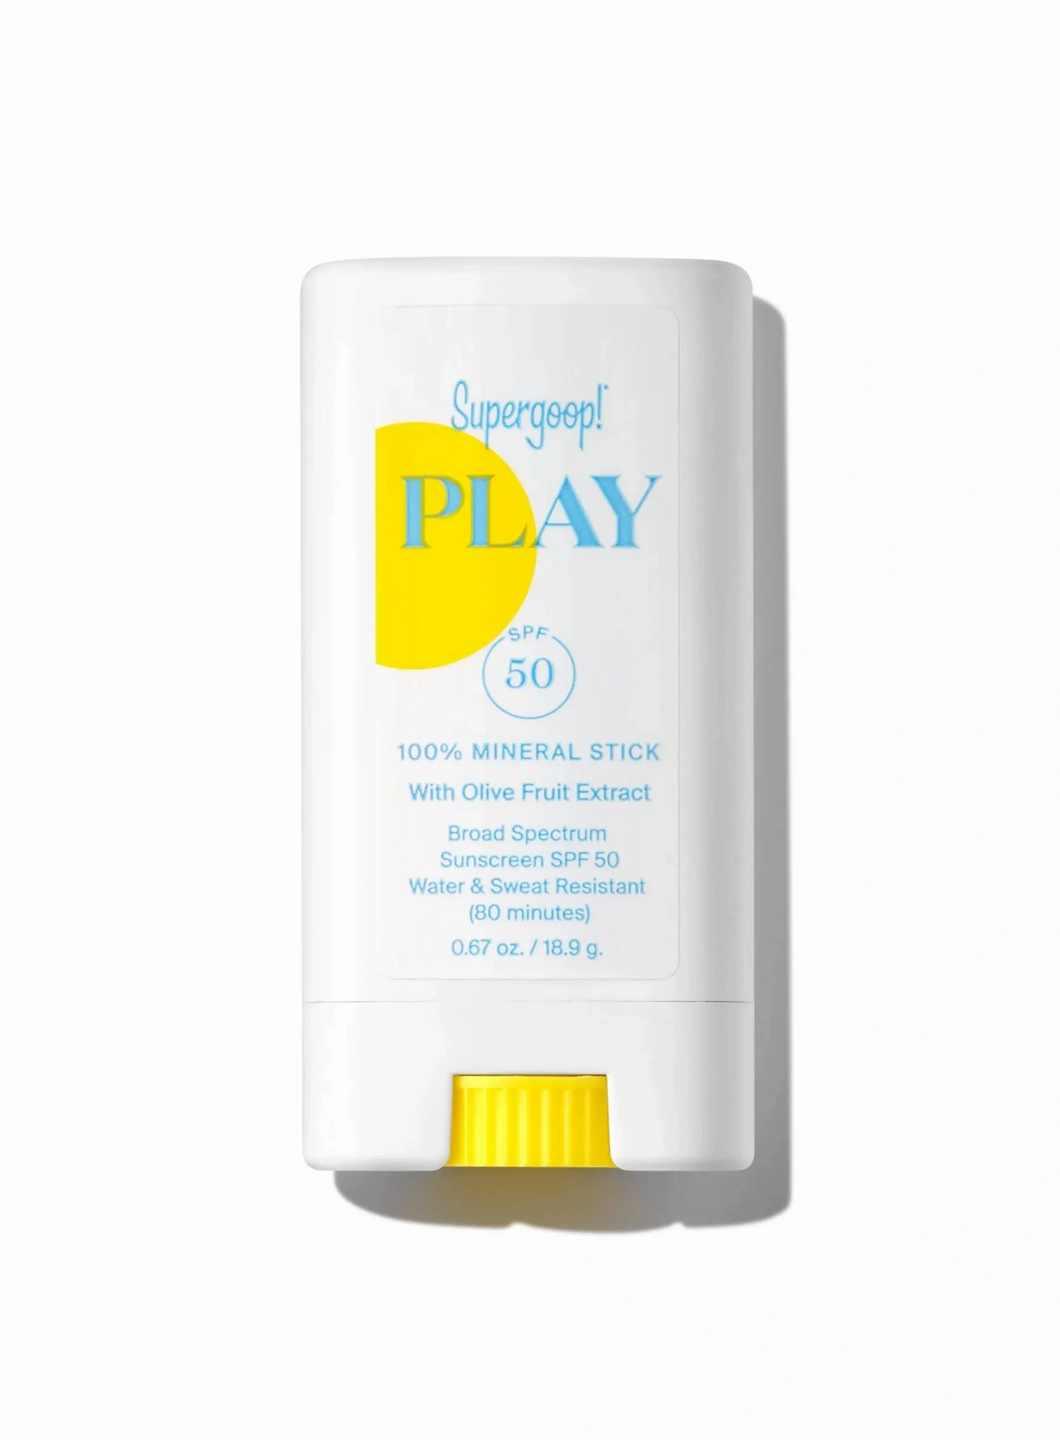 PLAY 100% Mineral Stick with Olive Fruit Extract SPF 50